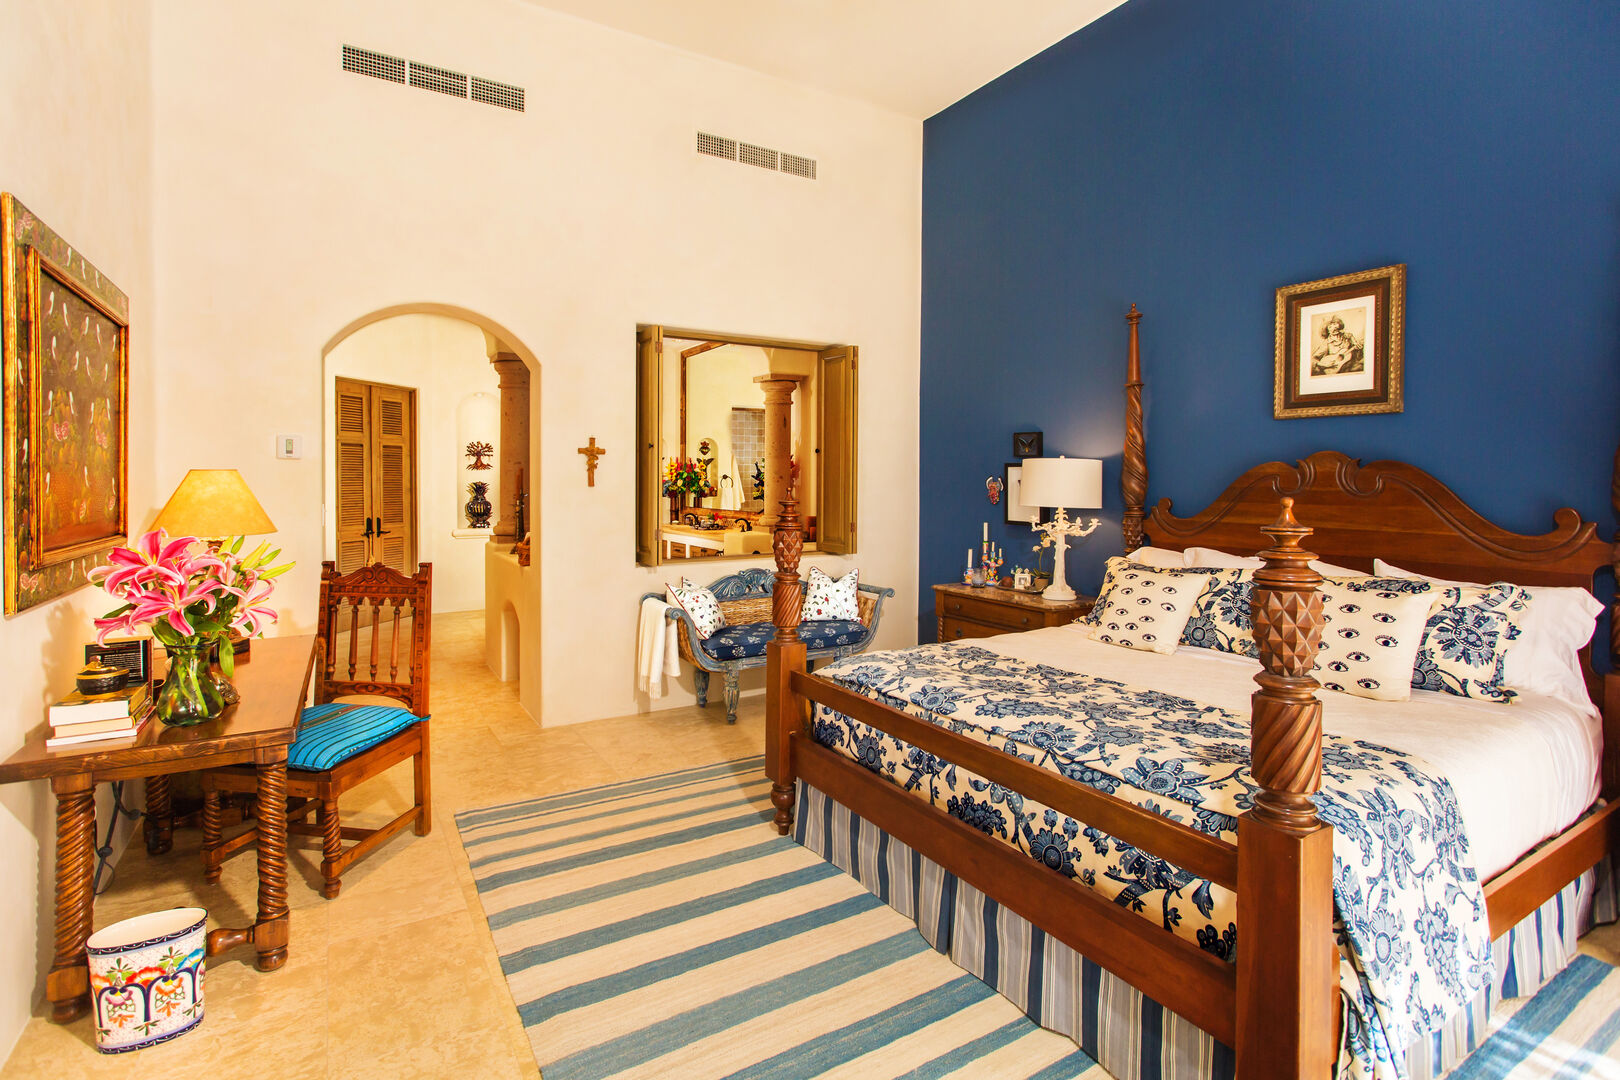 This villa in Los Cabos Mexico features a bedroom with blue walls and large bed